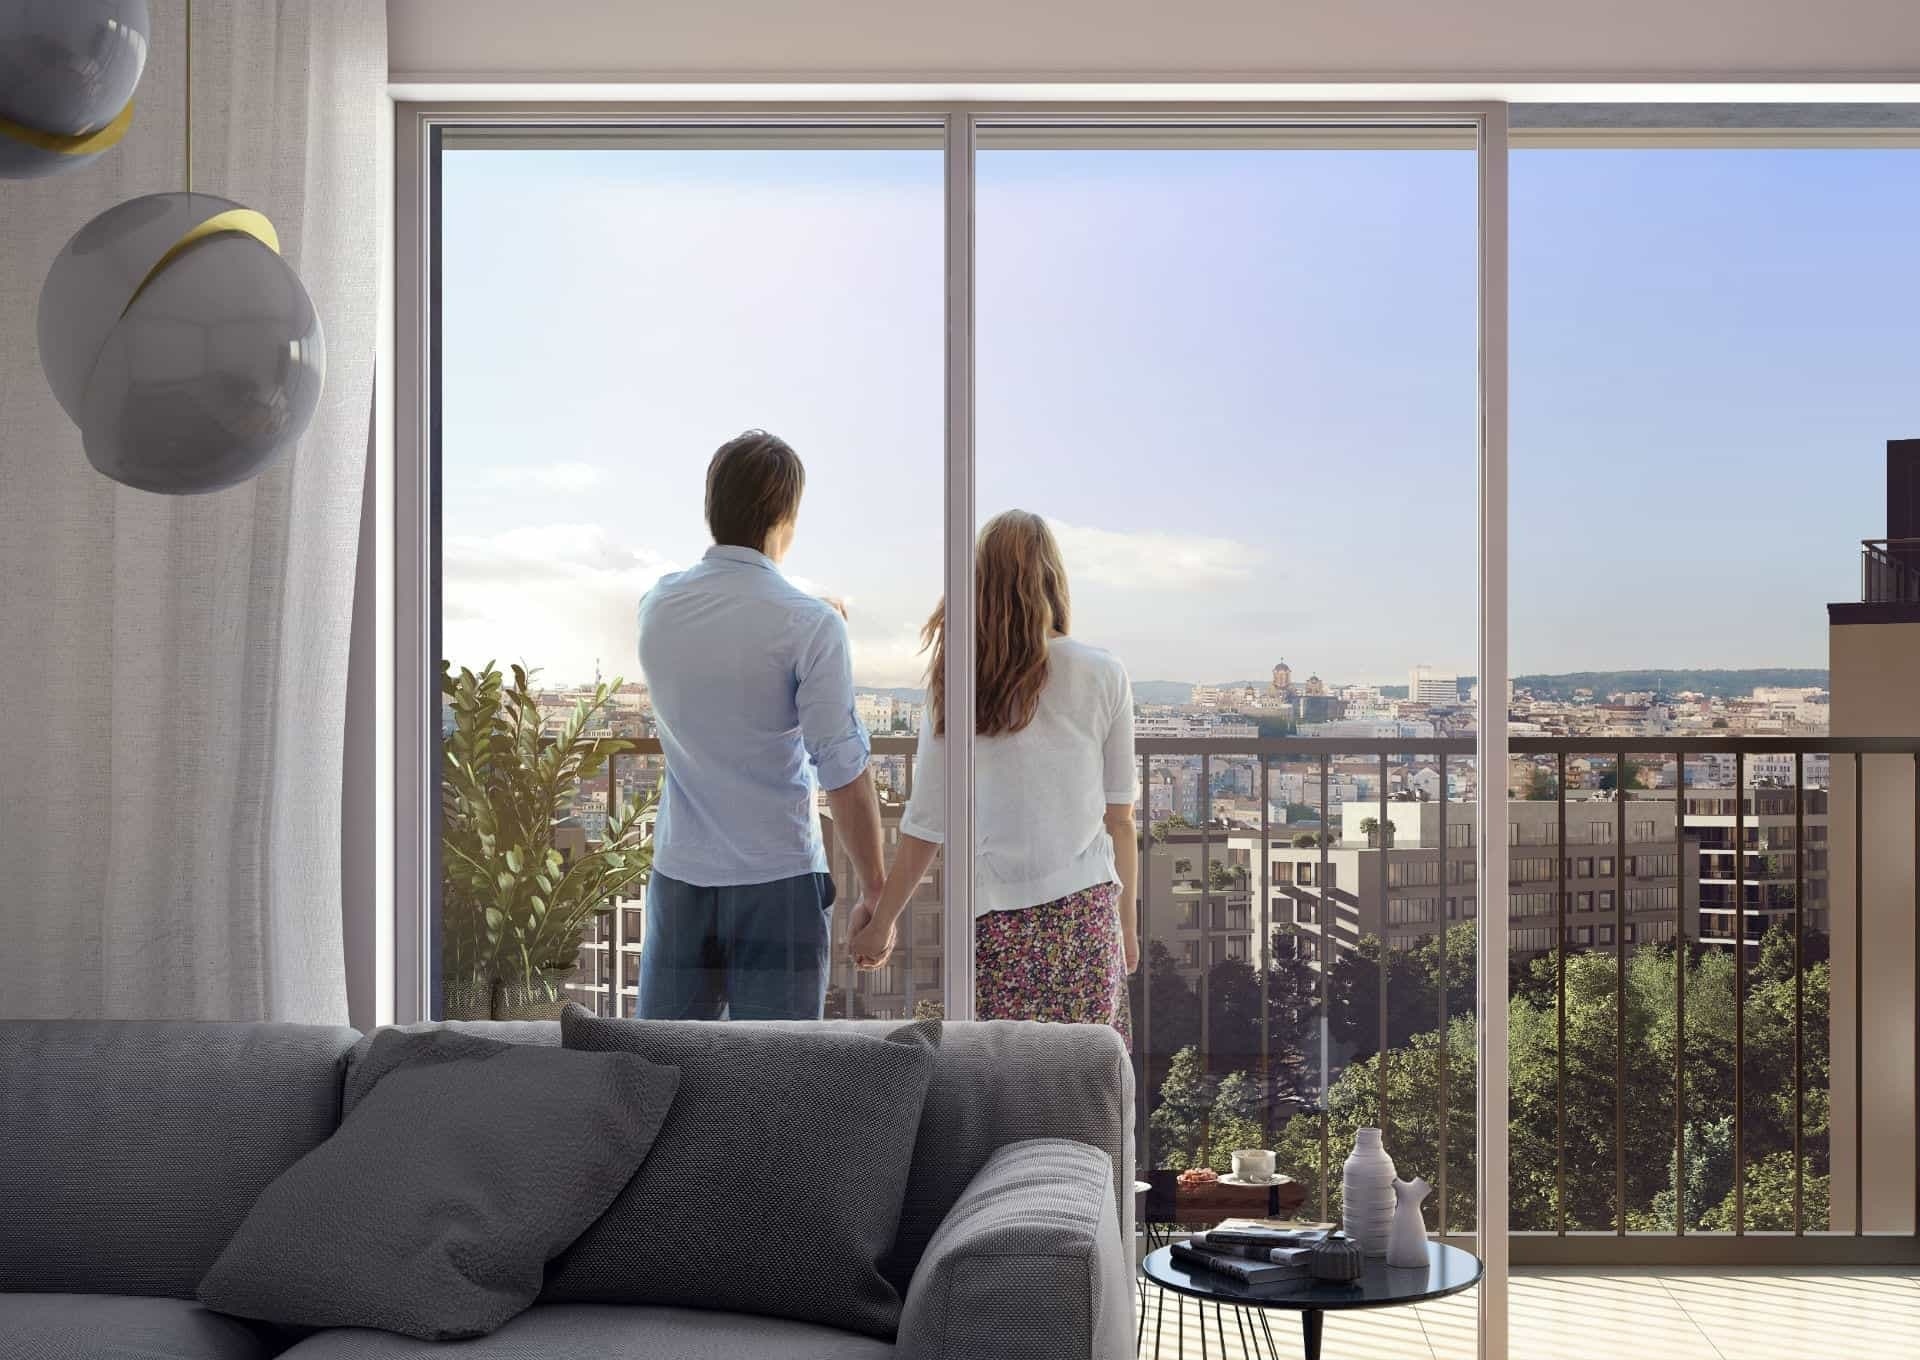 Belgrade Waterfront Announces Anticipated Sales Launch of BW Residences, with Exceptional Views of the Confluence and Kula Belgrade